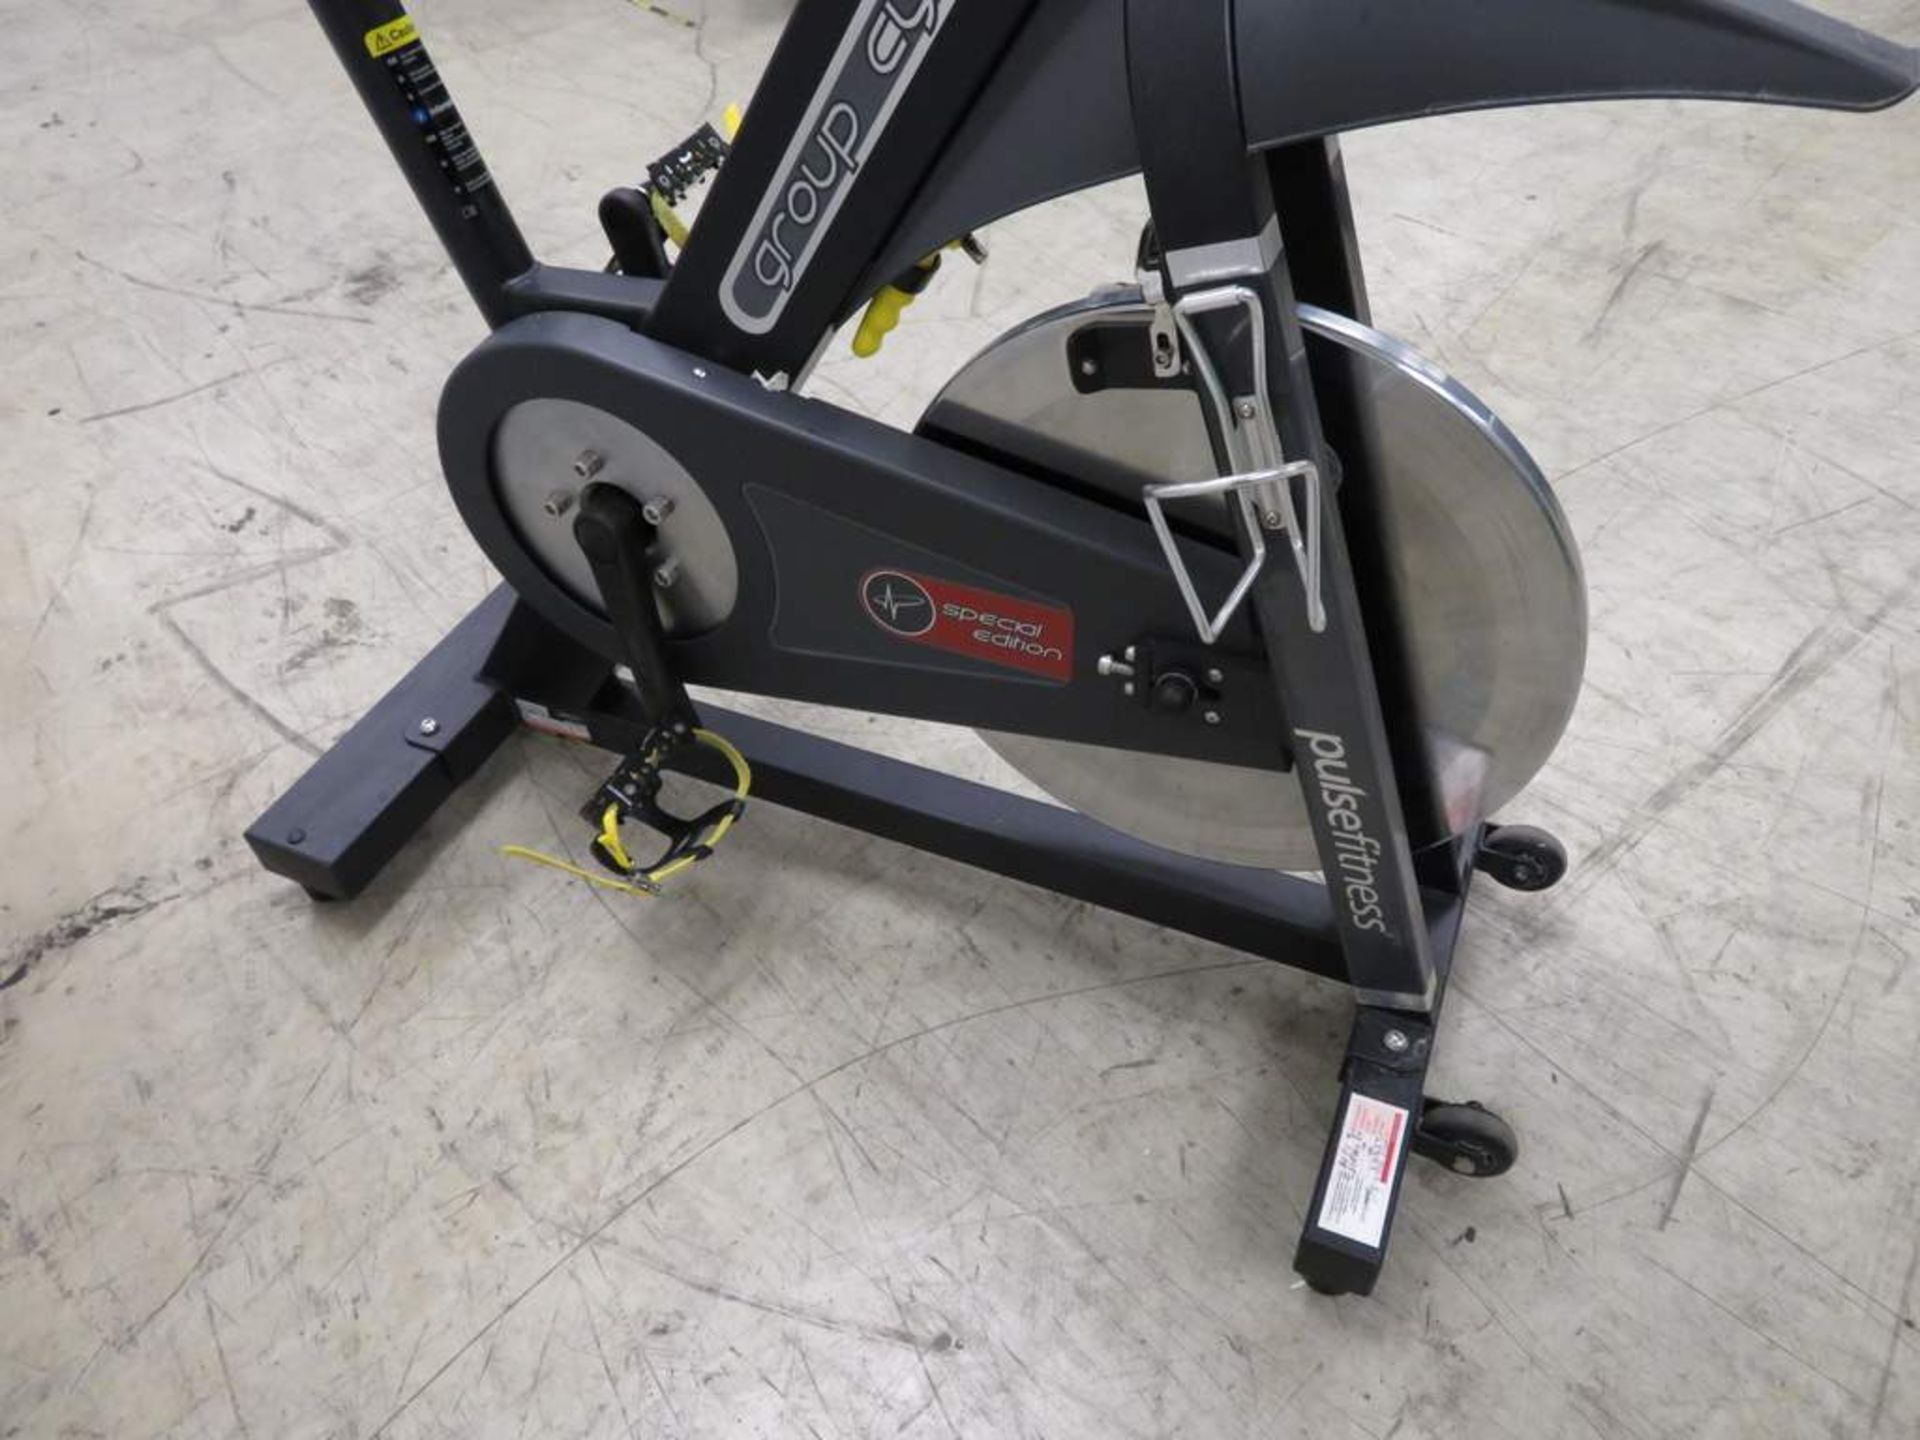 4x Pulse Fitness - Group Cycle spin bikes - Image 11 of 12